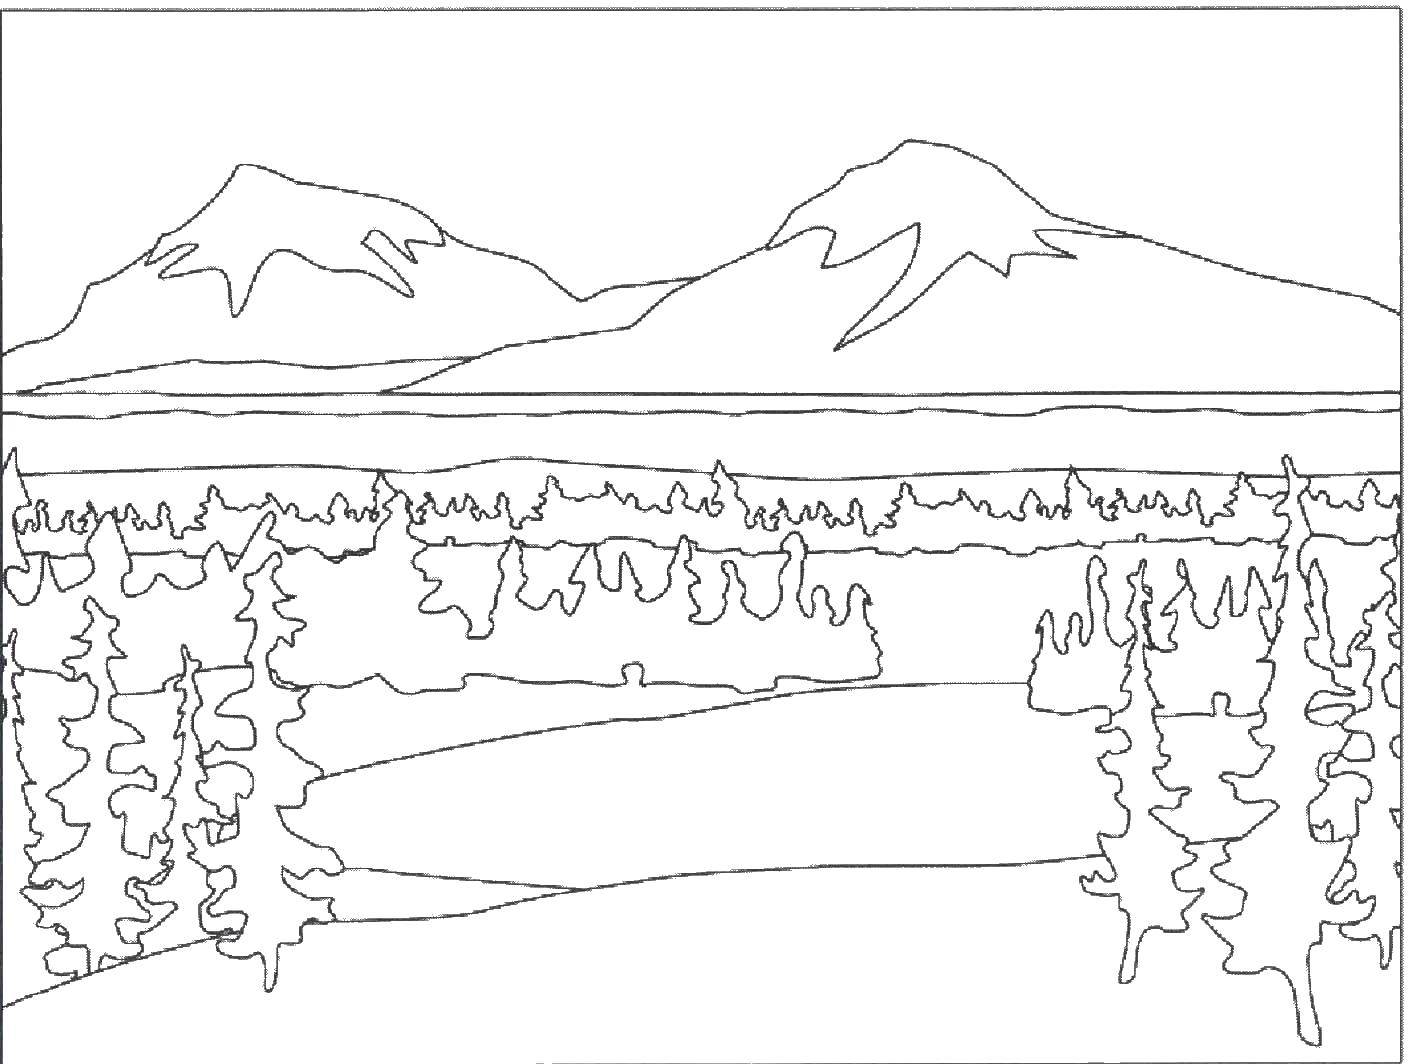 Coloring The mountains and forest. Category Nature. Tags:  Mountain, forest.